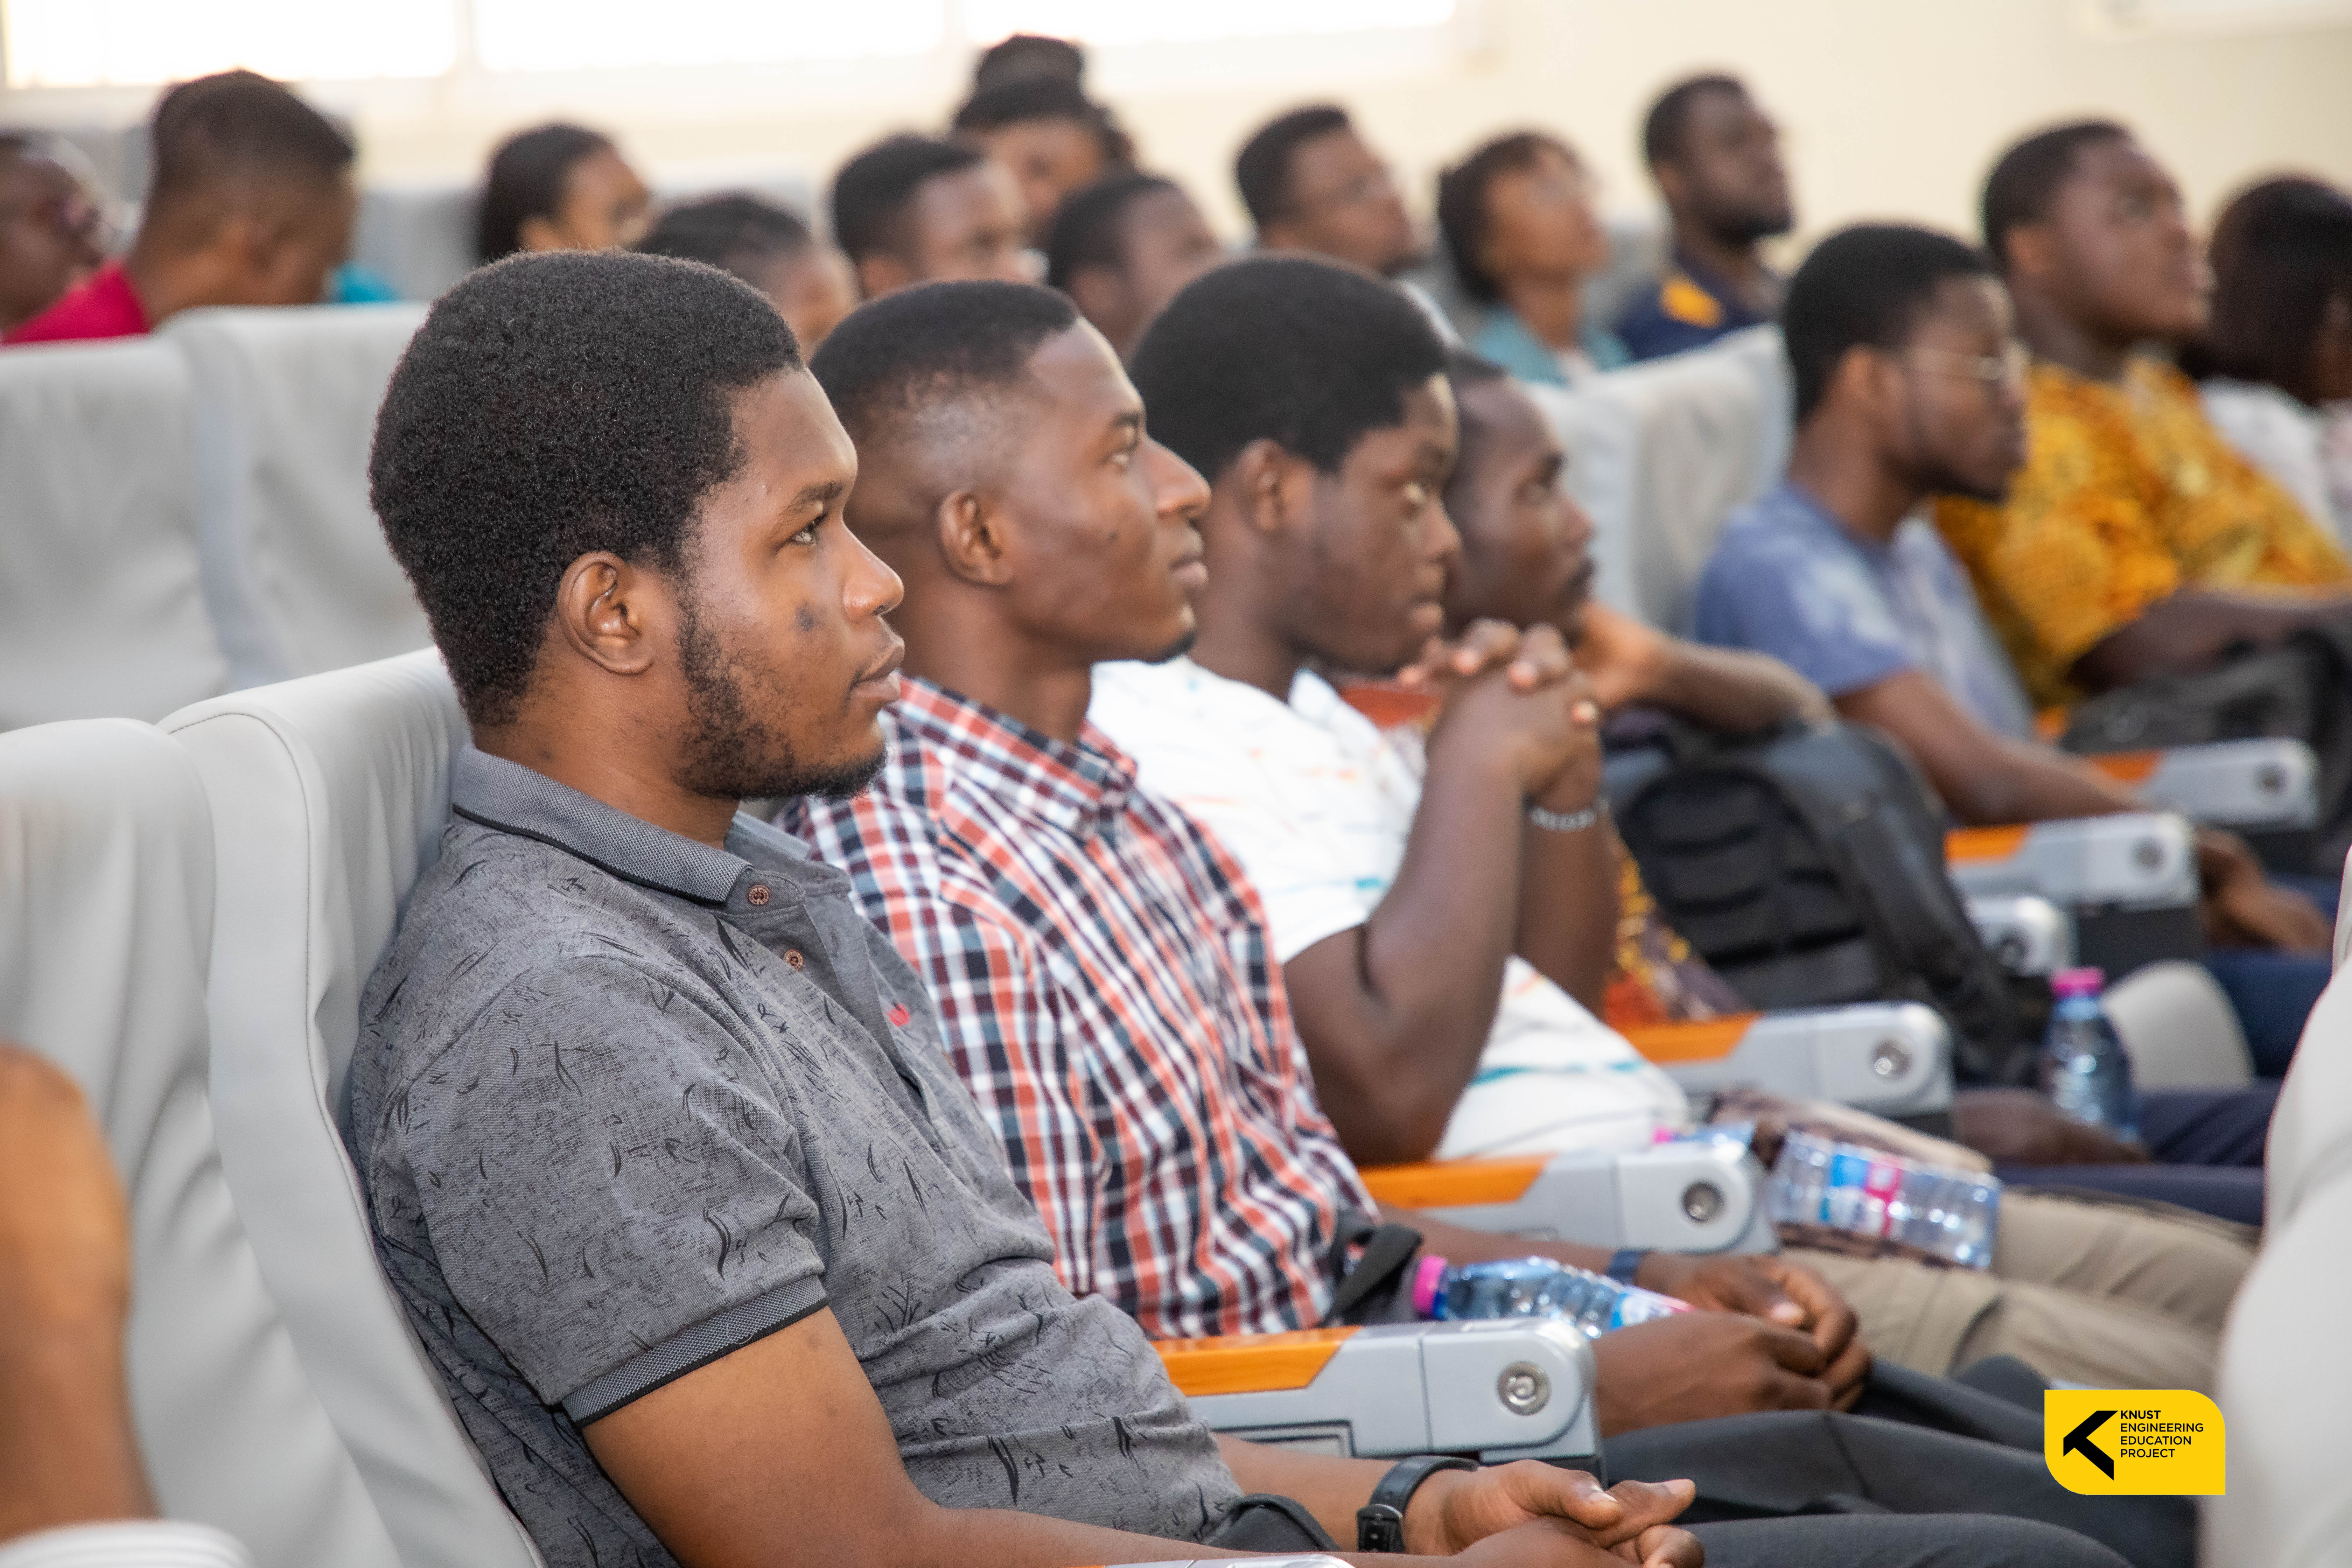 A cross-section of students at the orientation